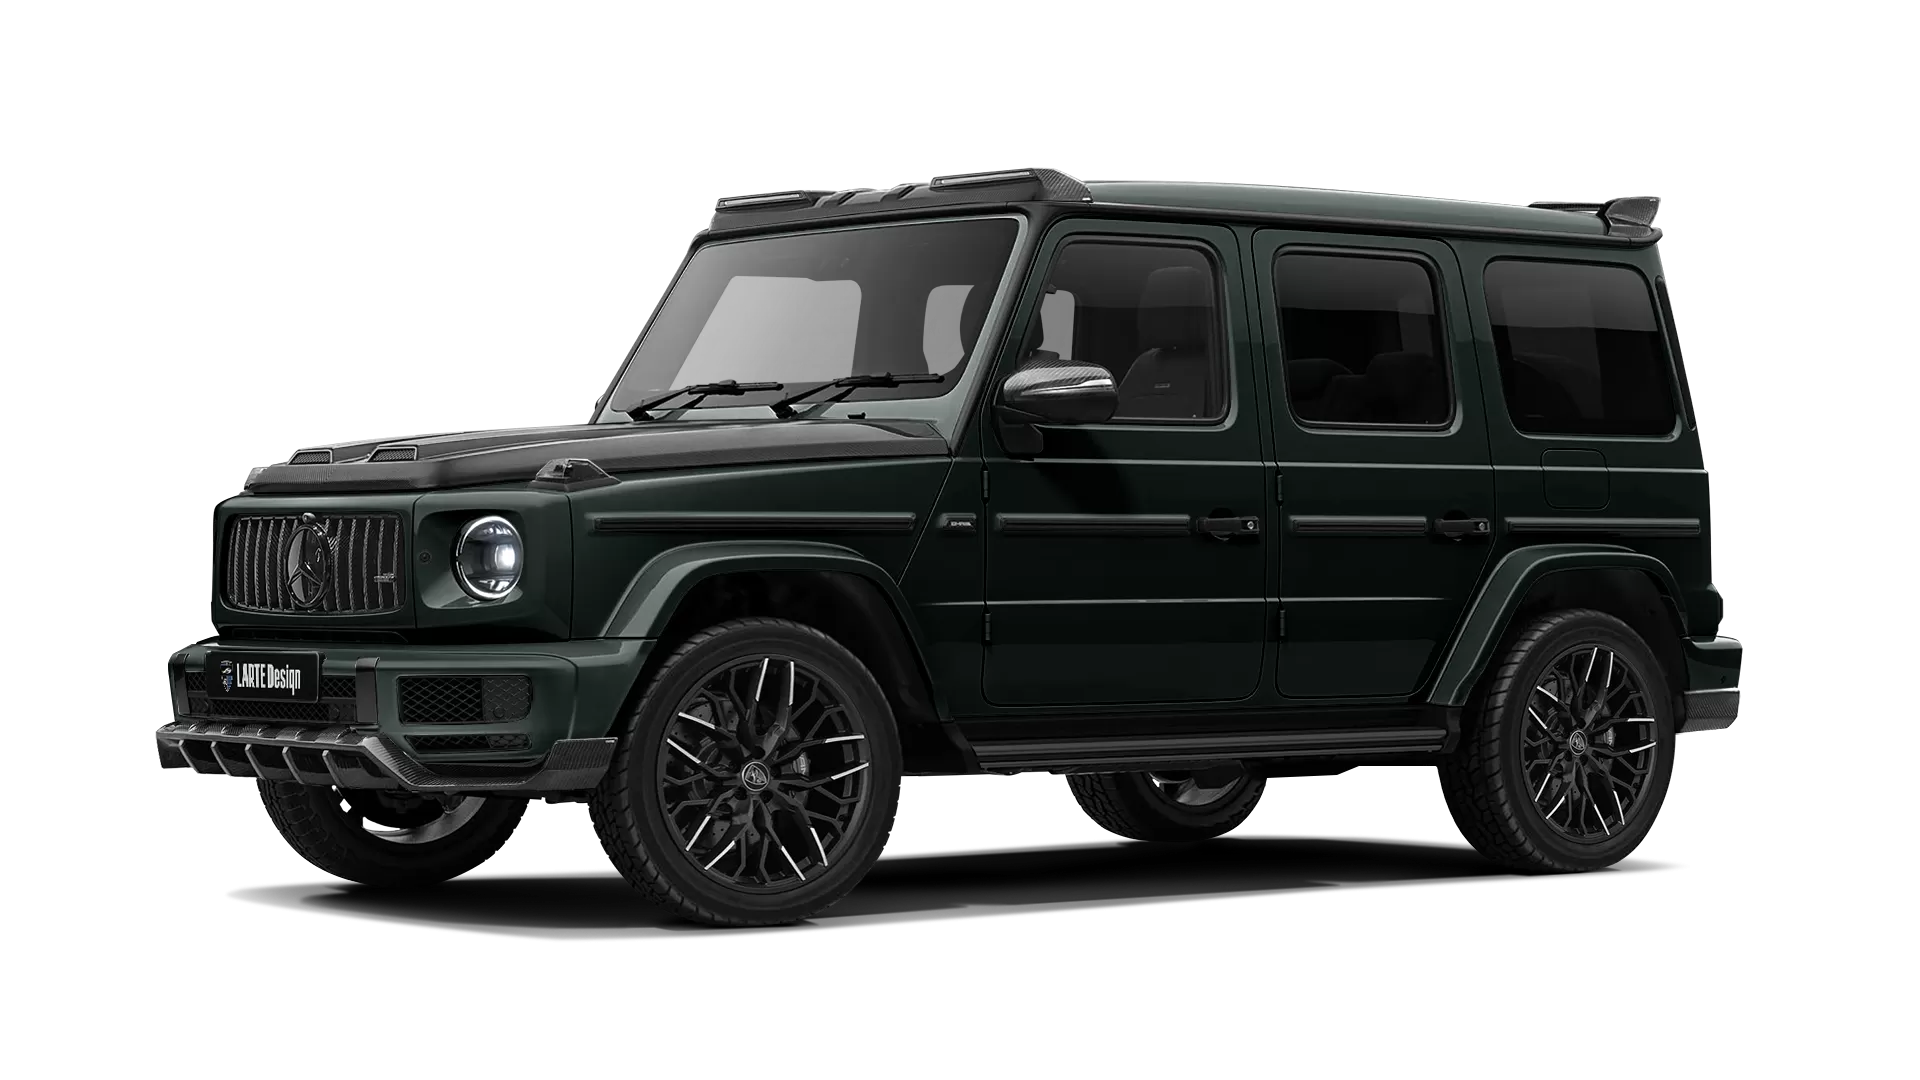 Mercedes G class W463 with carbon body kit: front view shown in Dark Green